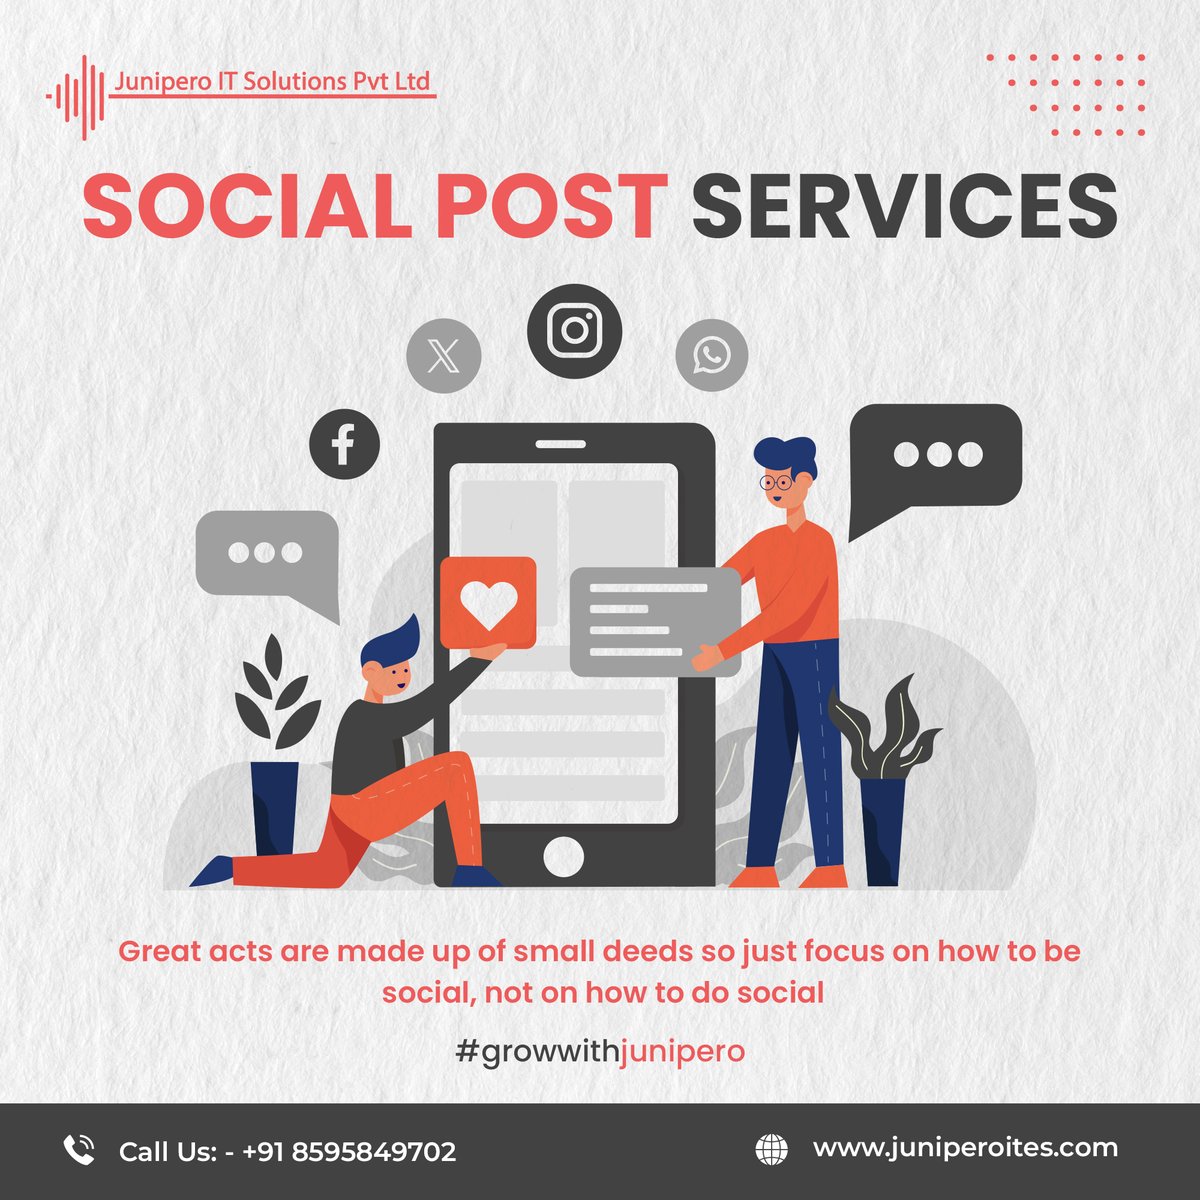 Great acts are made up of small deeds so just focus on how to be social, not on how to do social.
-
-
-
#socialmedia #socialpost #markettingpost #potential #socialmarketing #content #socialposting #contentpromotion #brand #growwithjunipero #social #post #media #marketing #promo